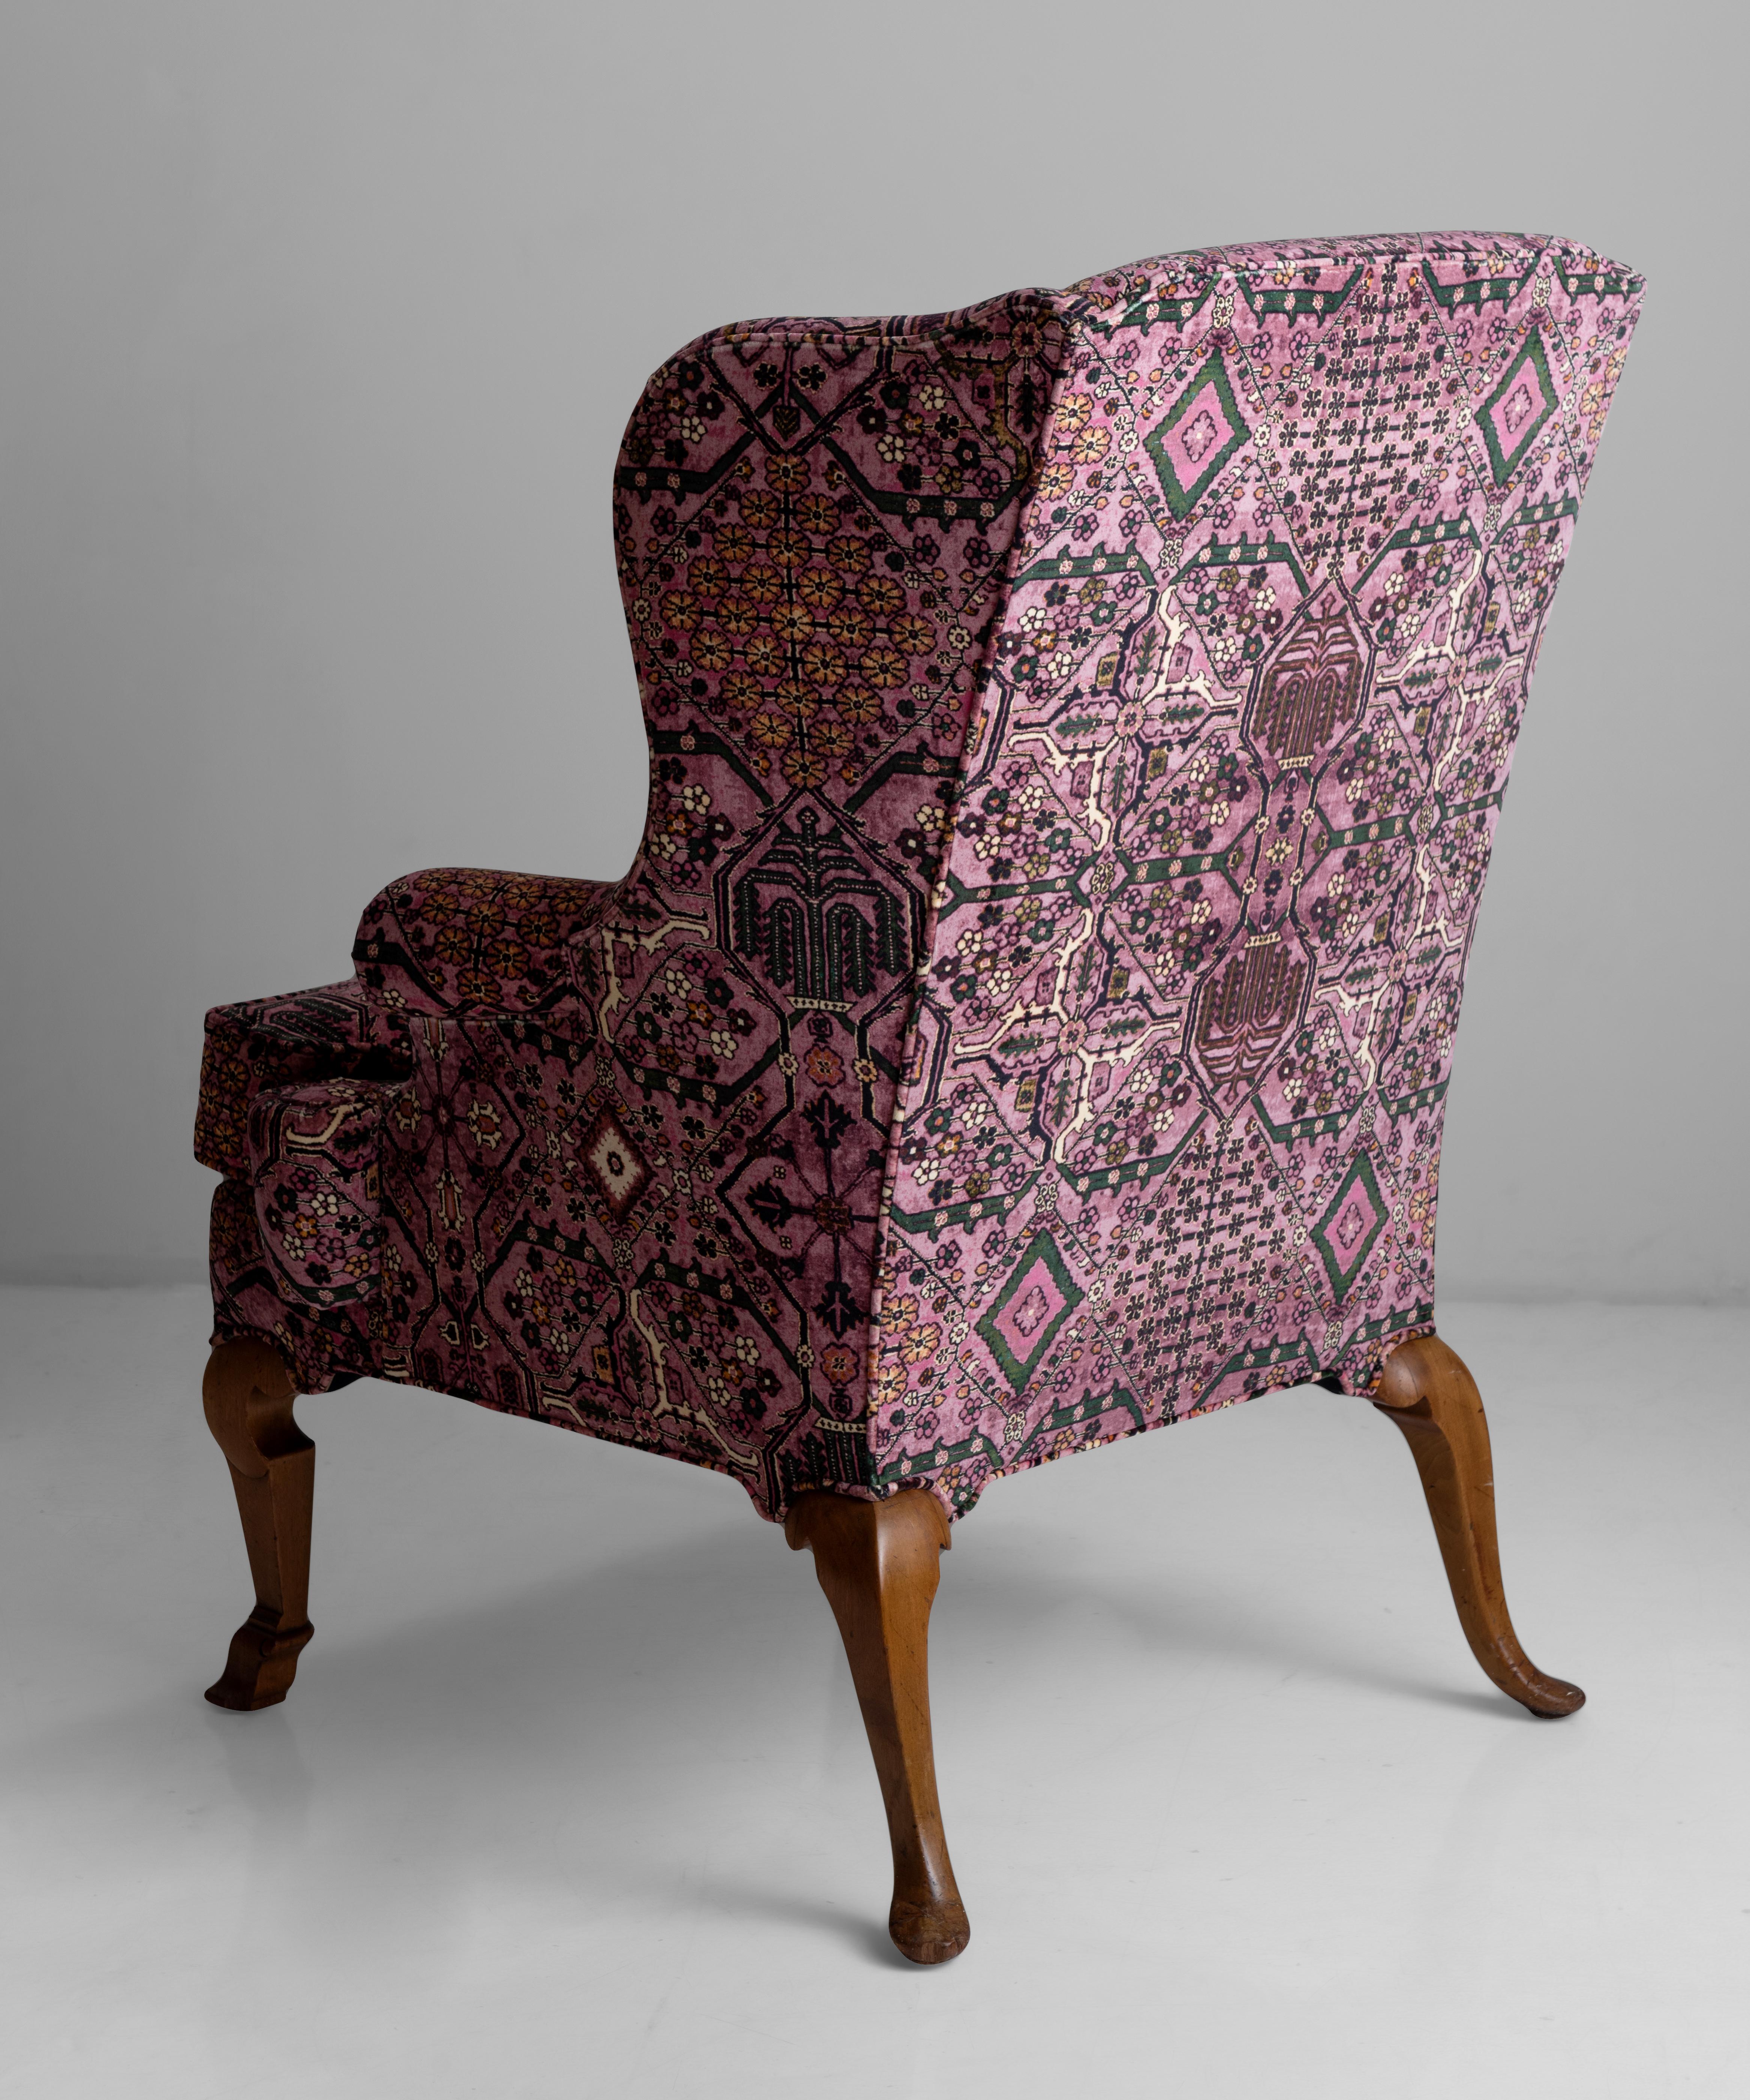 English Walnut Wing Chair in 100% Cotton Velvet from House of Hackney